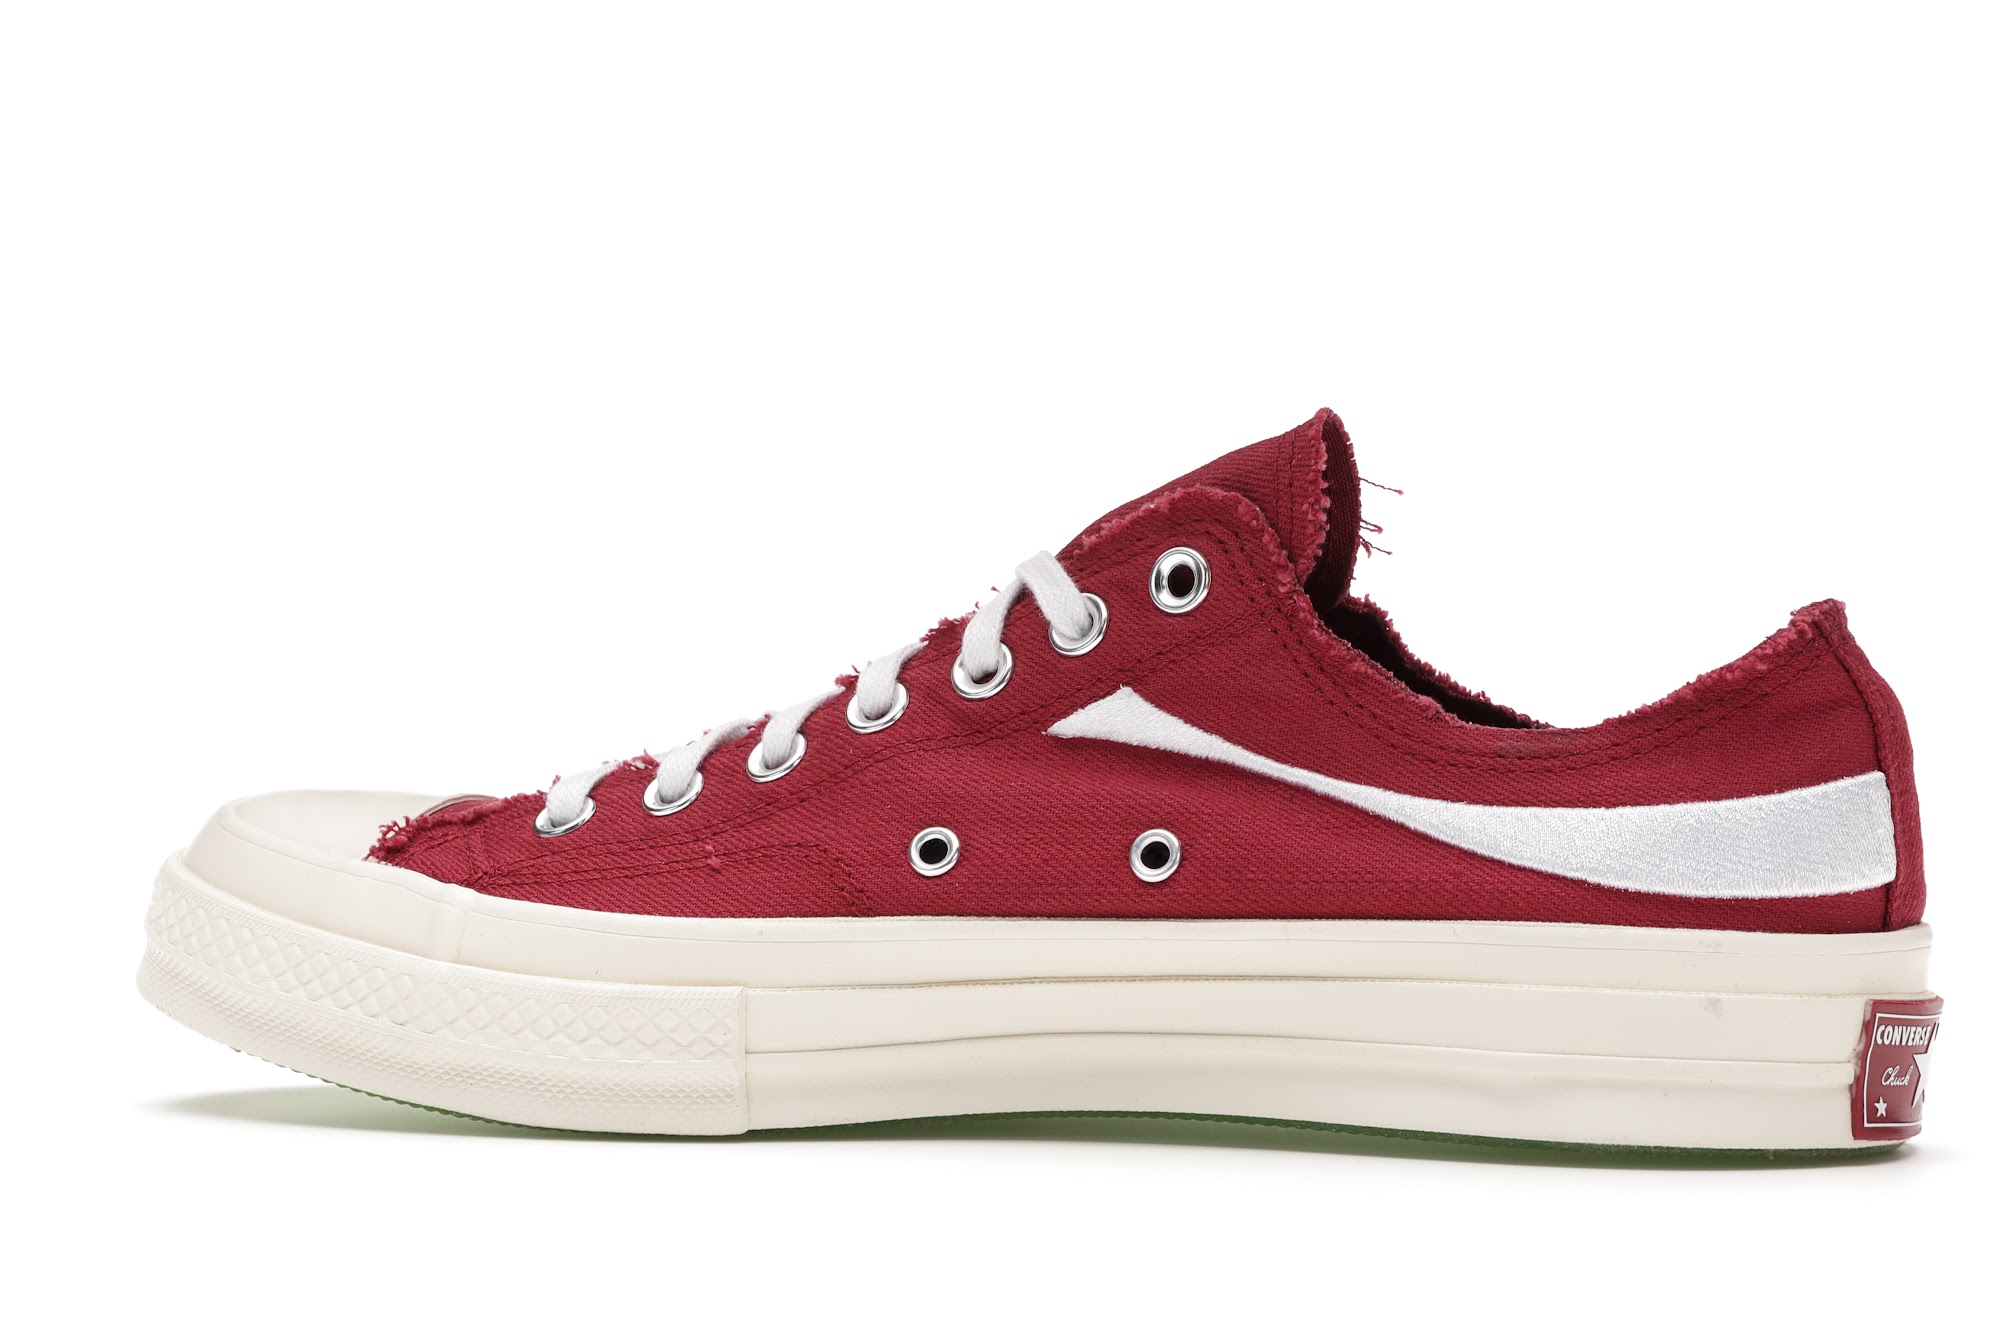 converse all star 70 ox maroon,Quality 